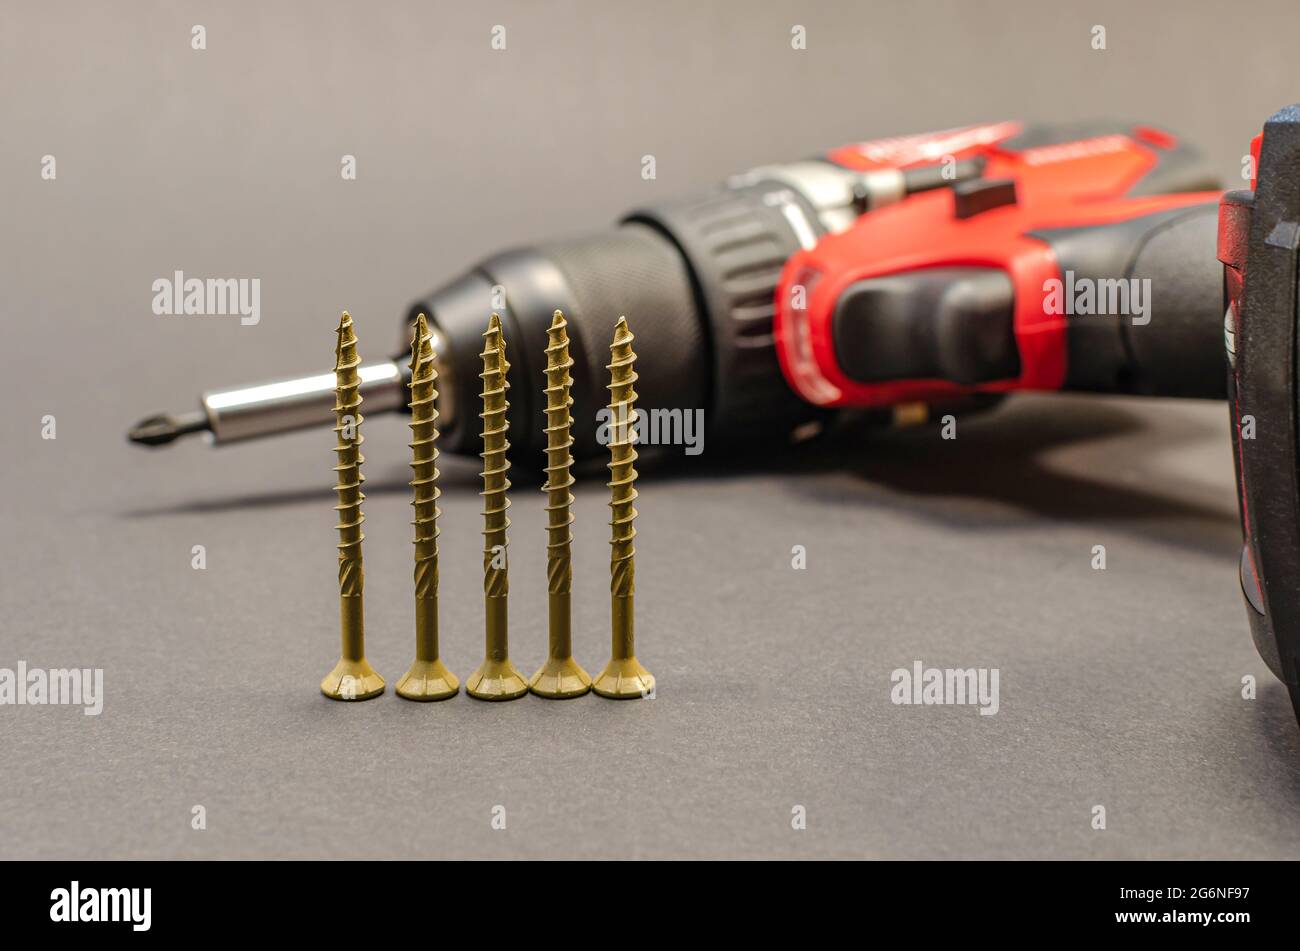 Self-tapping screws on the background of a battery screwdriver, a selection of different self-tapping screws on a black background. Stock Photo